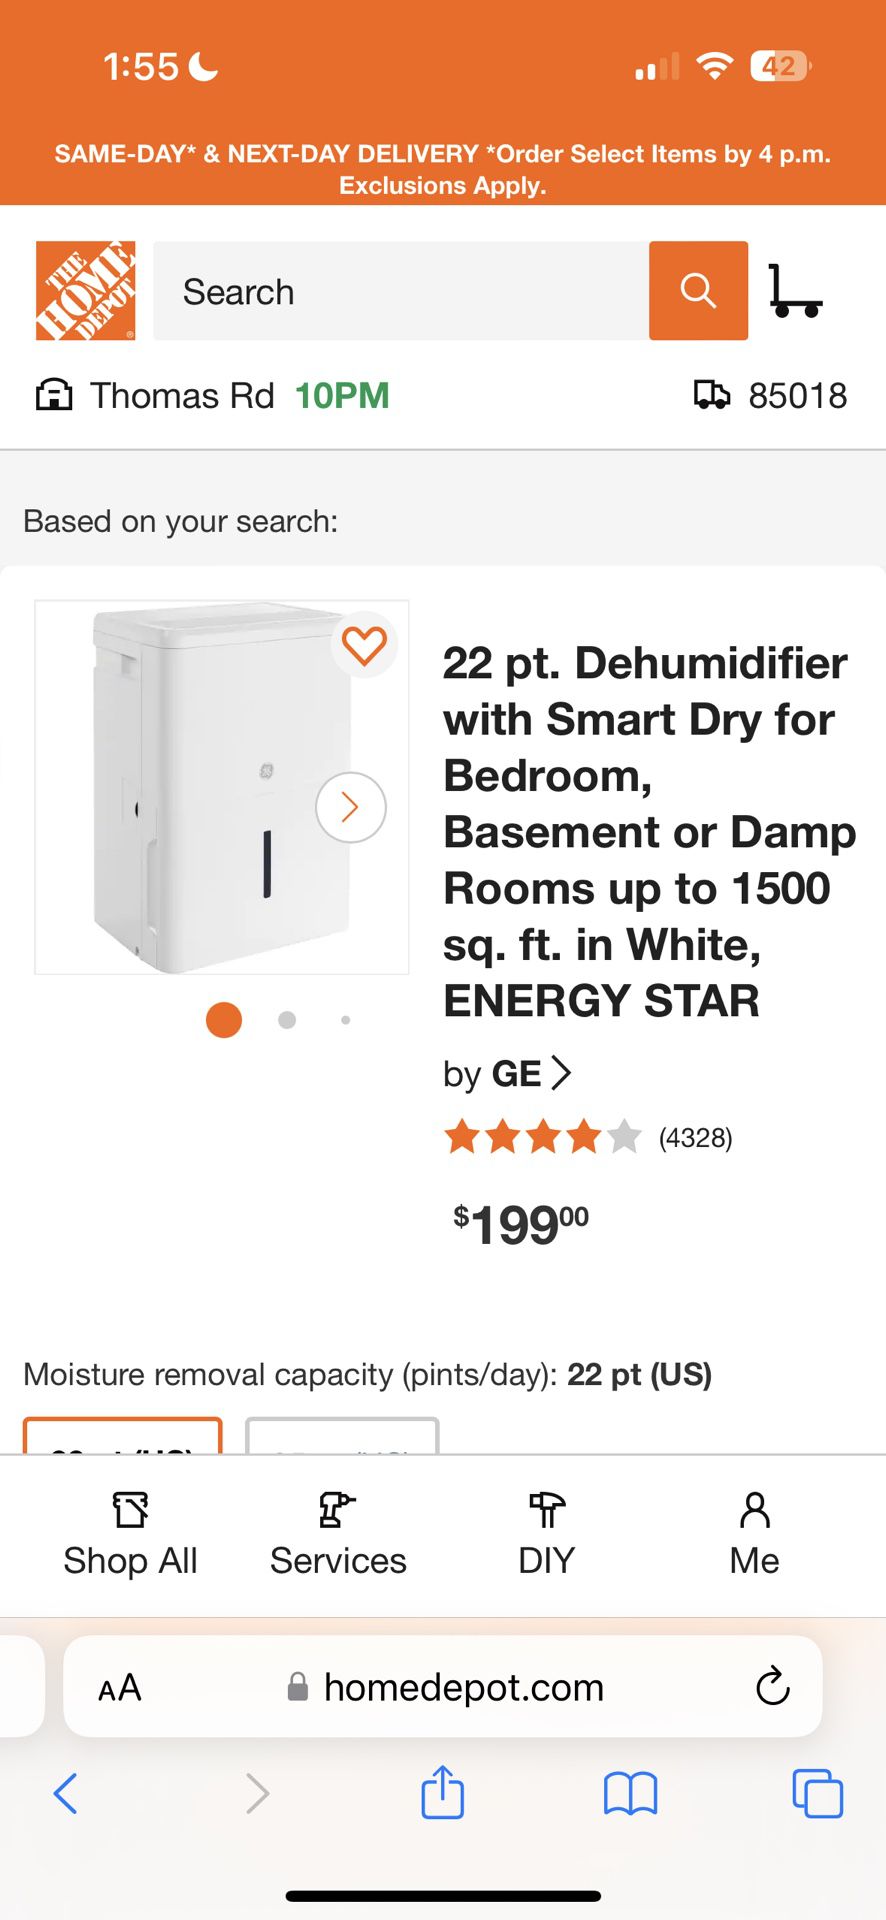 GE dehumidifier.  22 Pint, with hose option for continual drainage